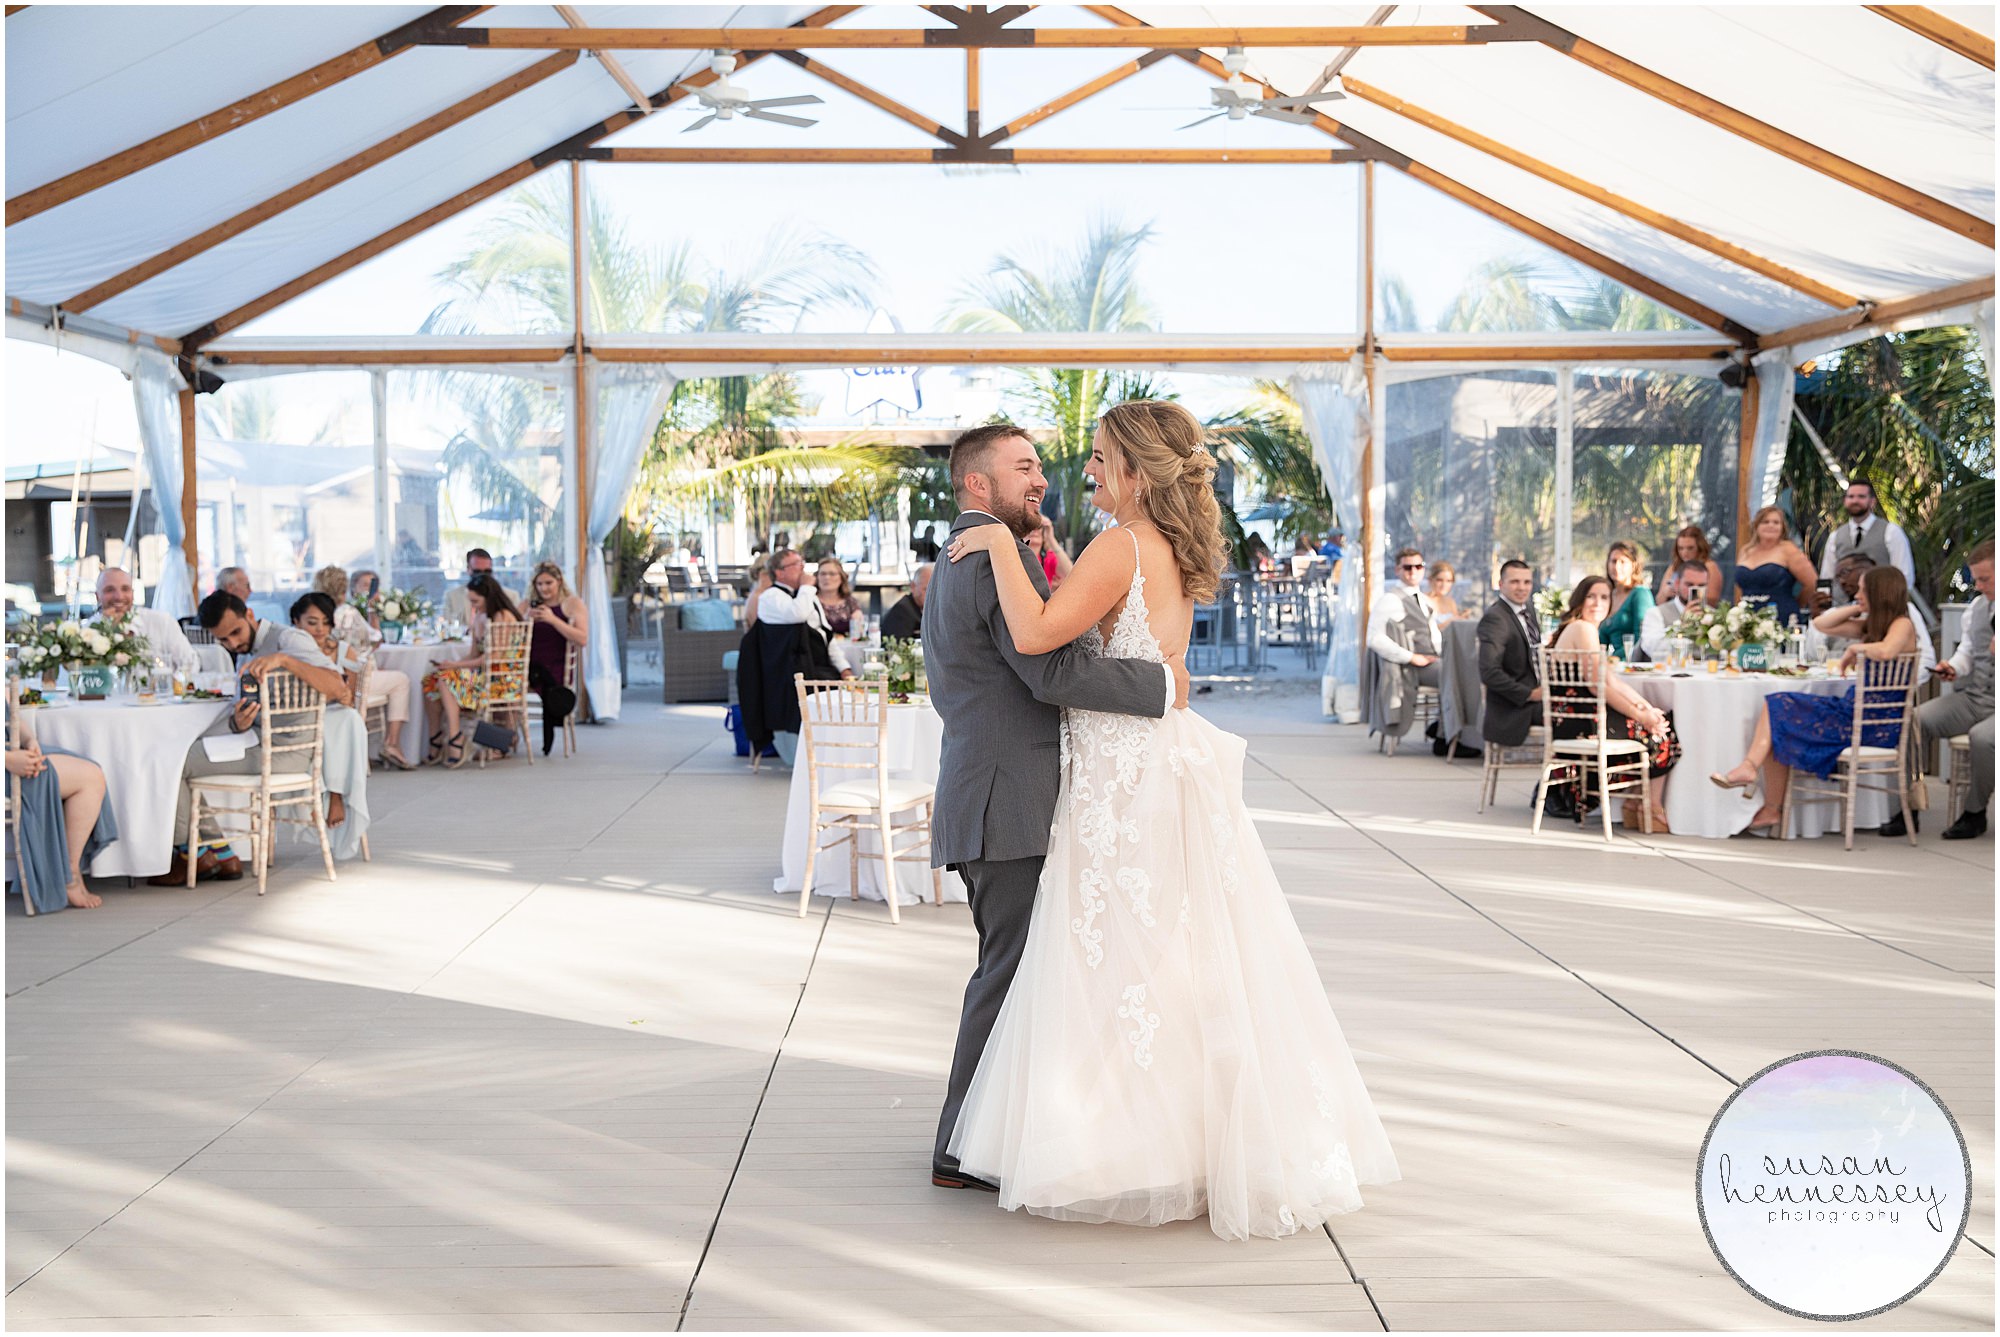 First Dance for bride and groom at ICONA Diamond Beach wedding